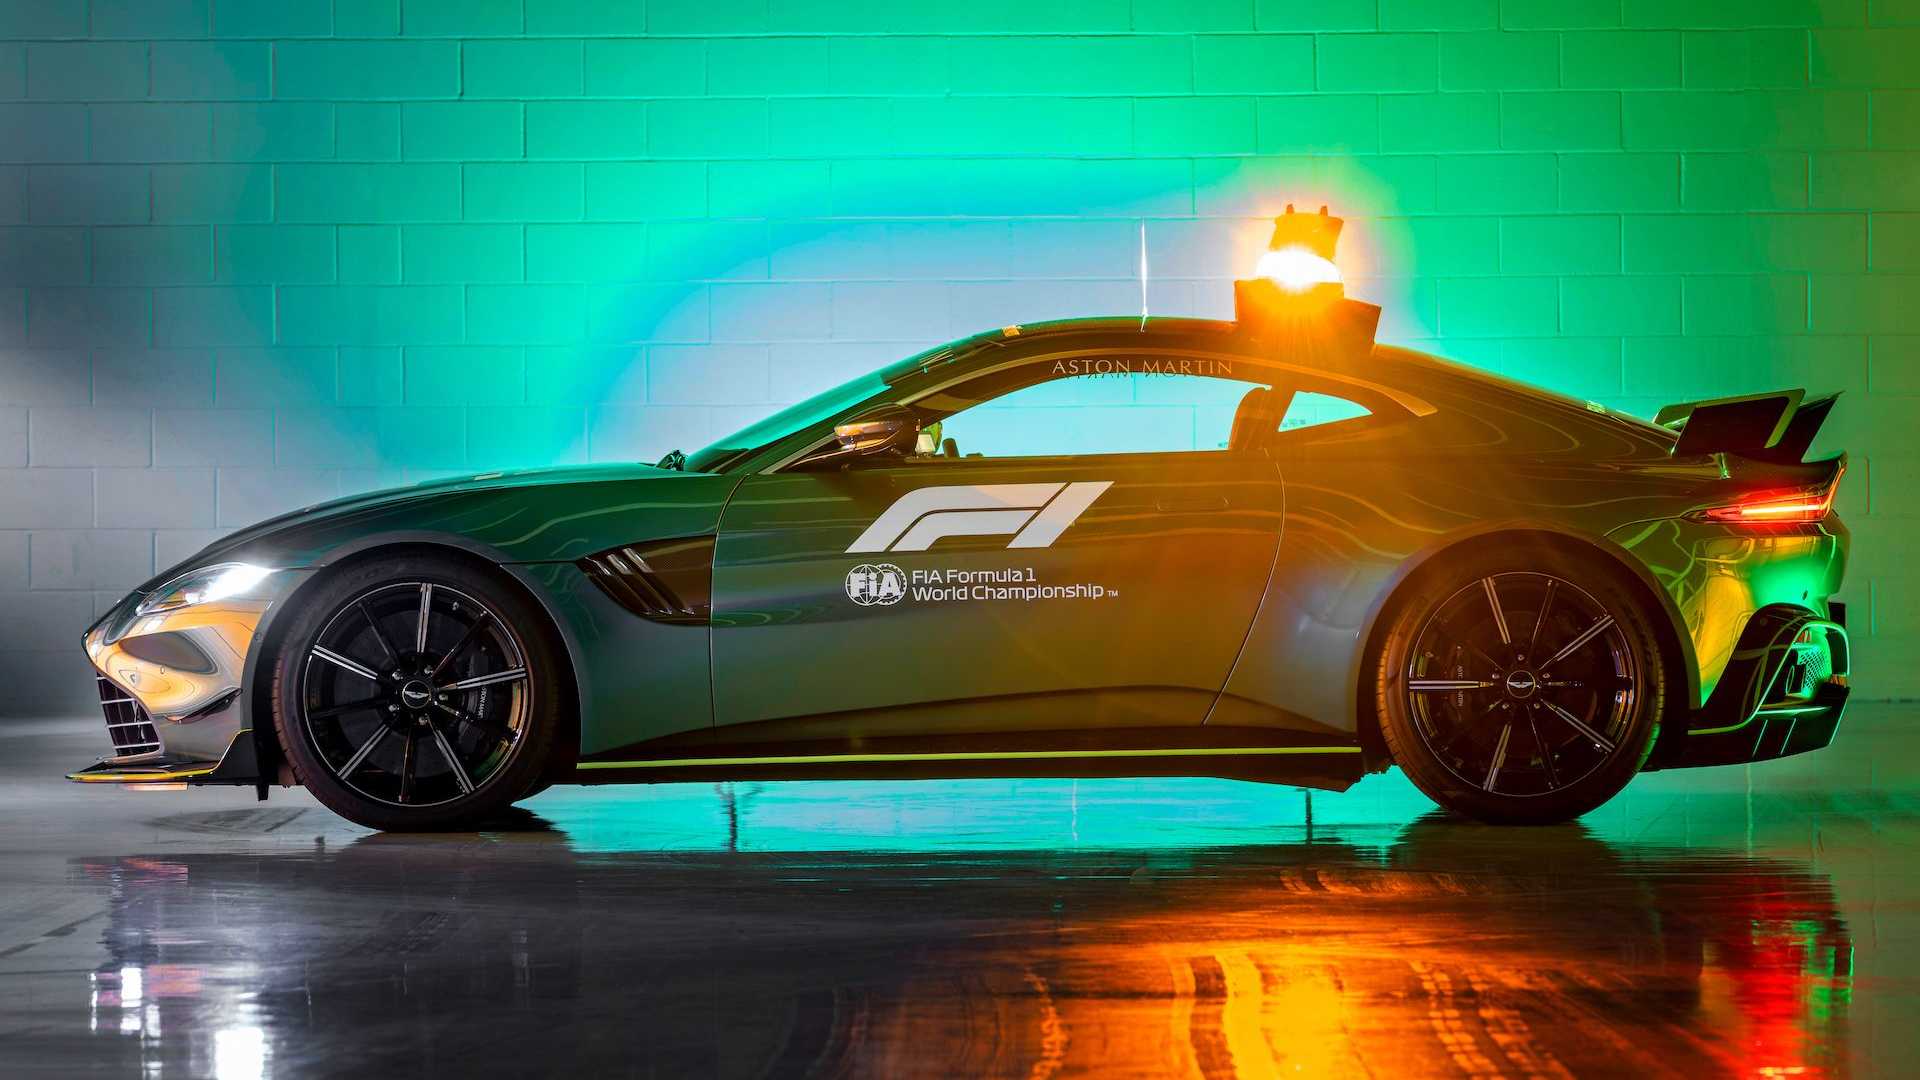 Aston Martin Shows Off Official F1 Safety, Medical Cars For 2021 Season